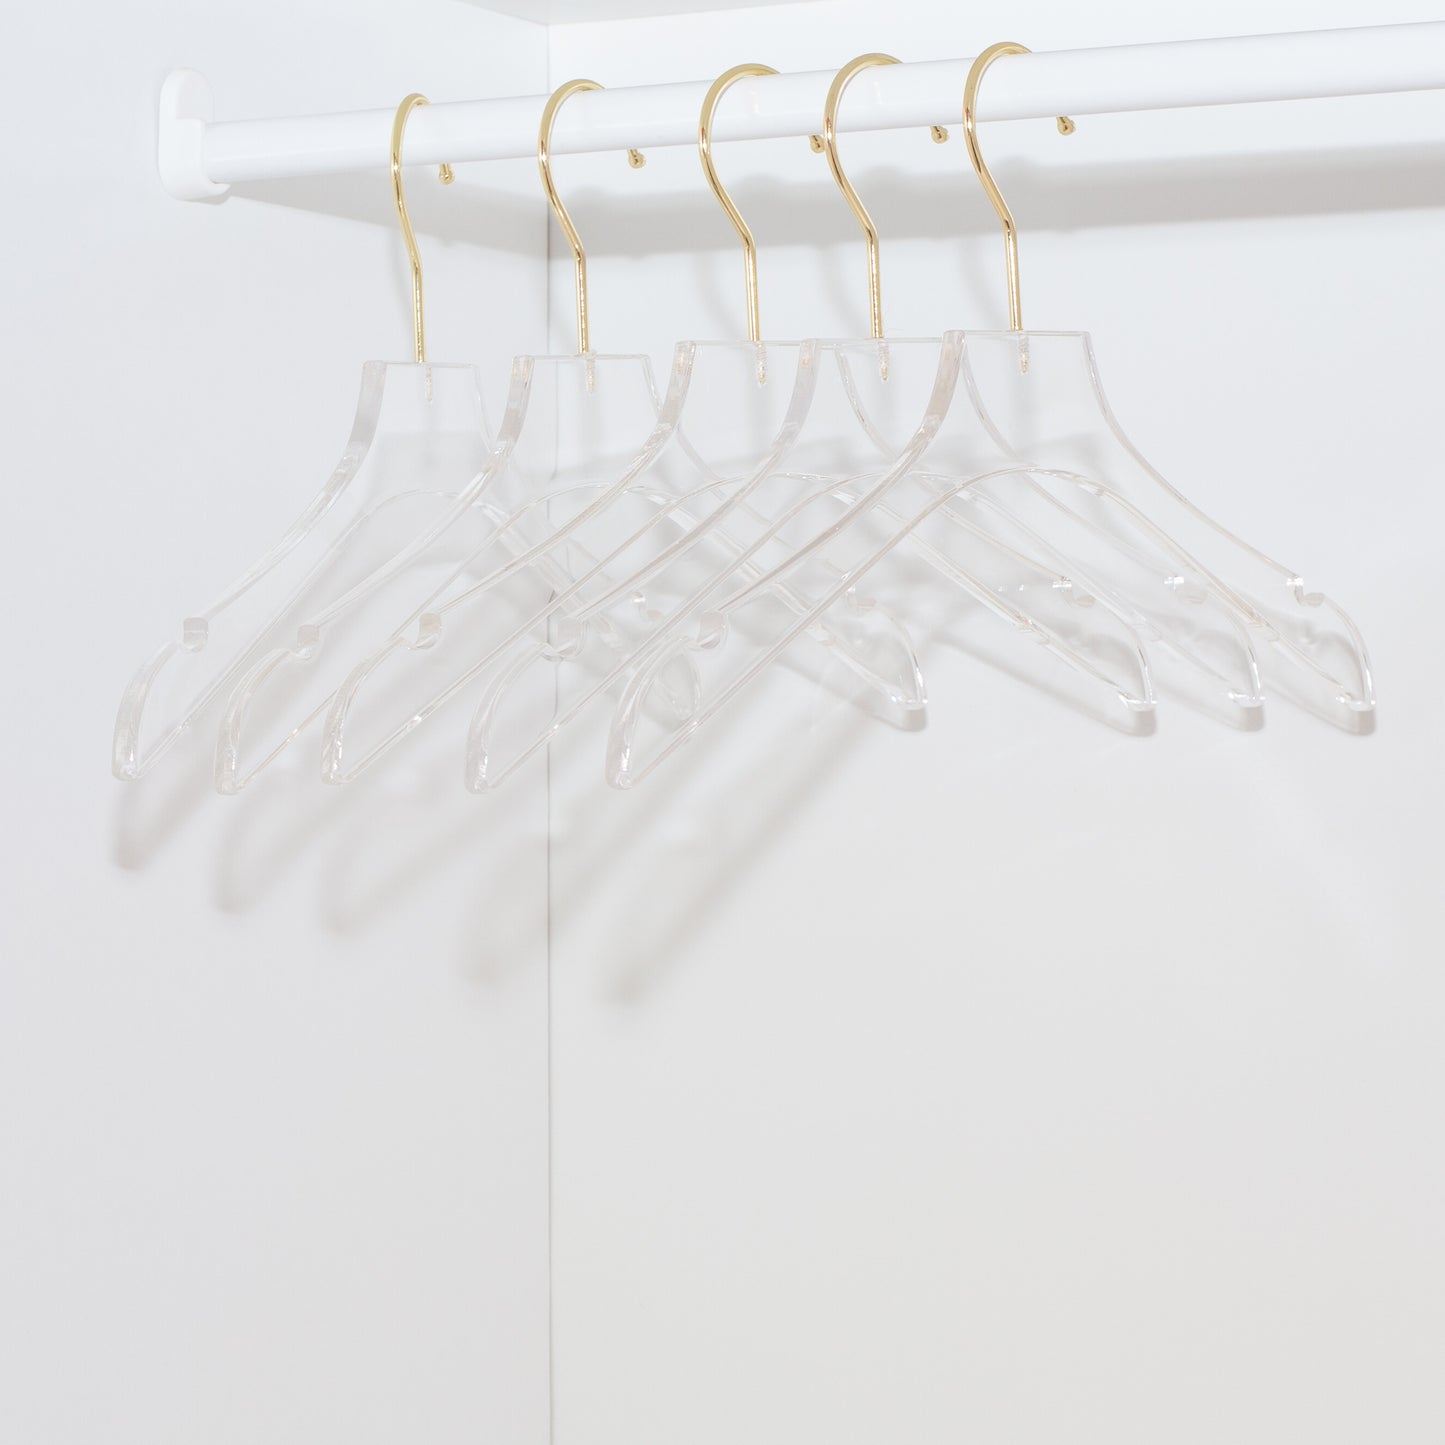 Acrylic Shirt Hanger with Gold Hook